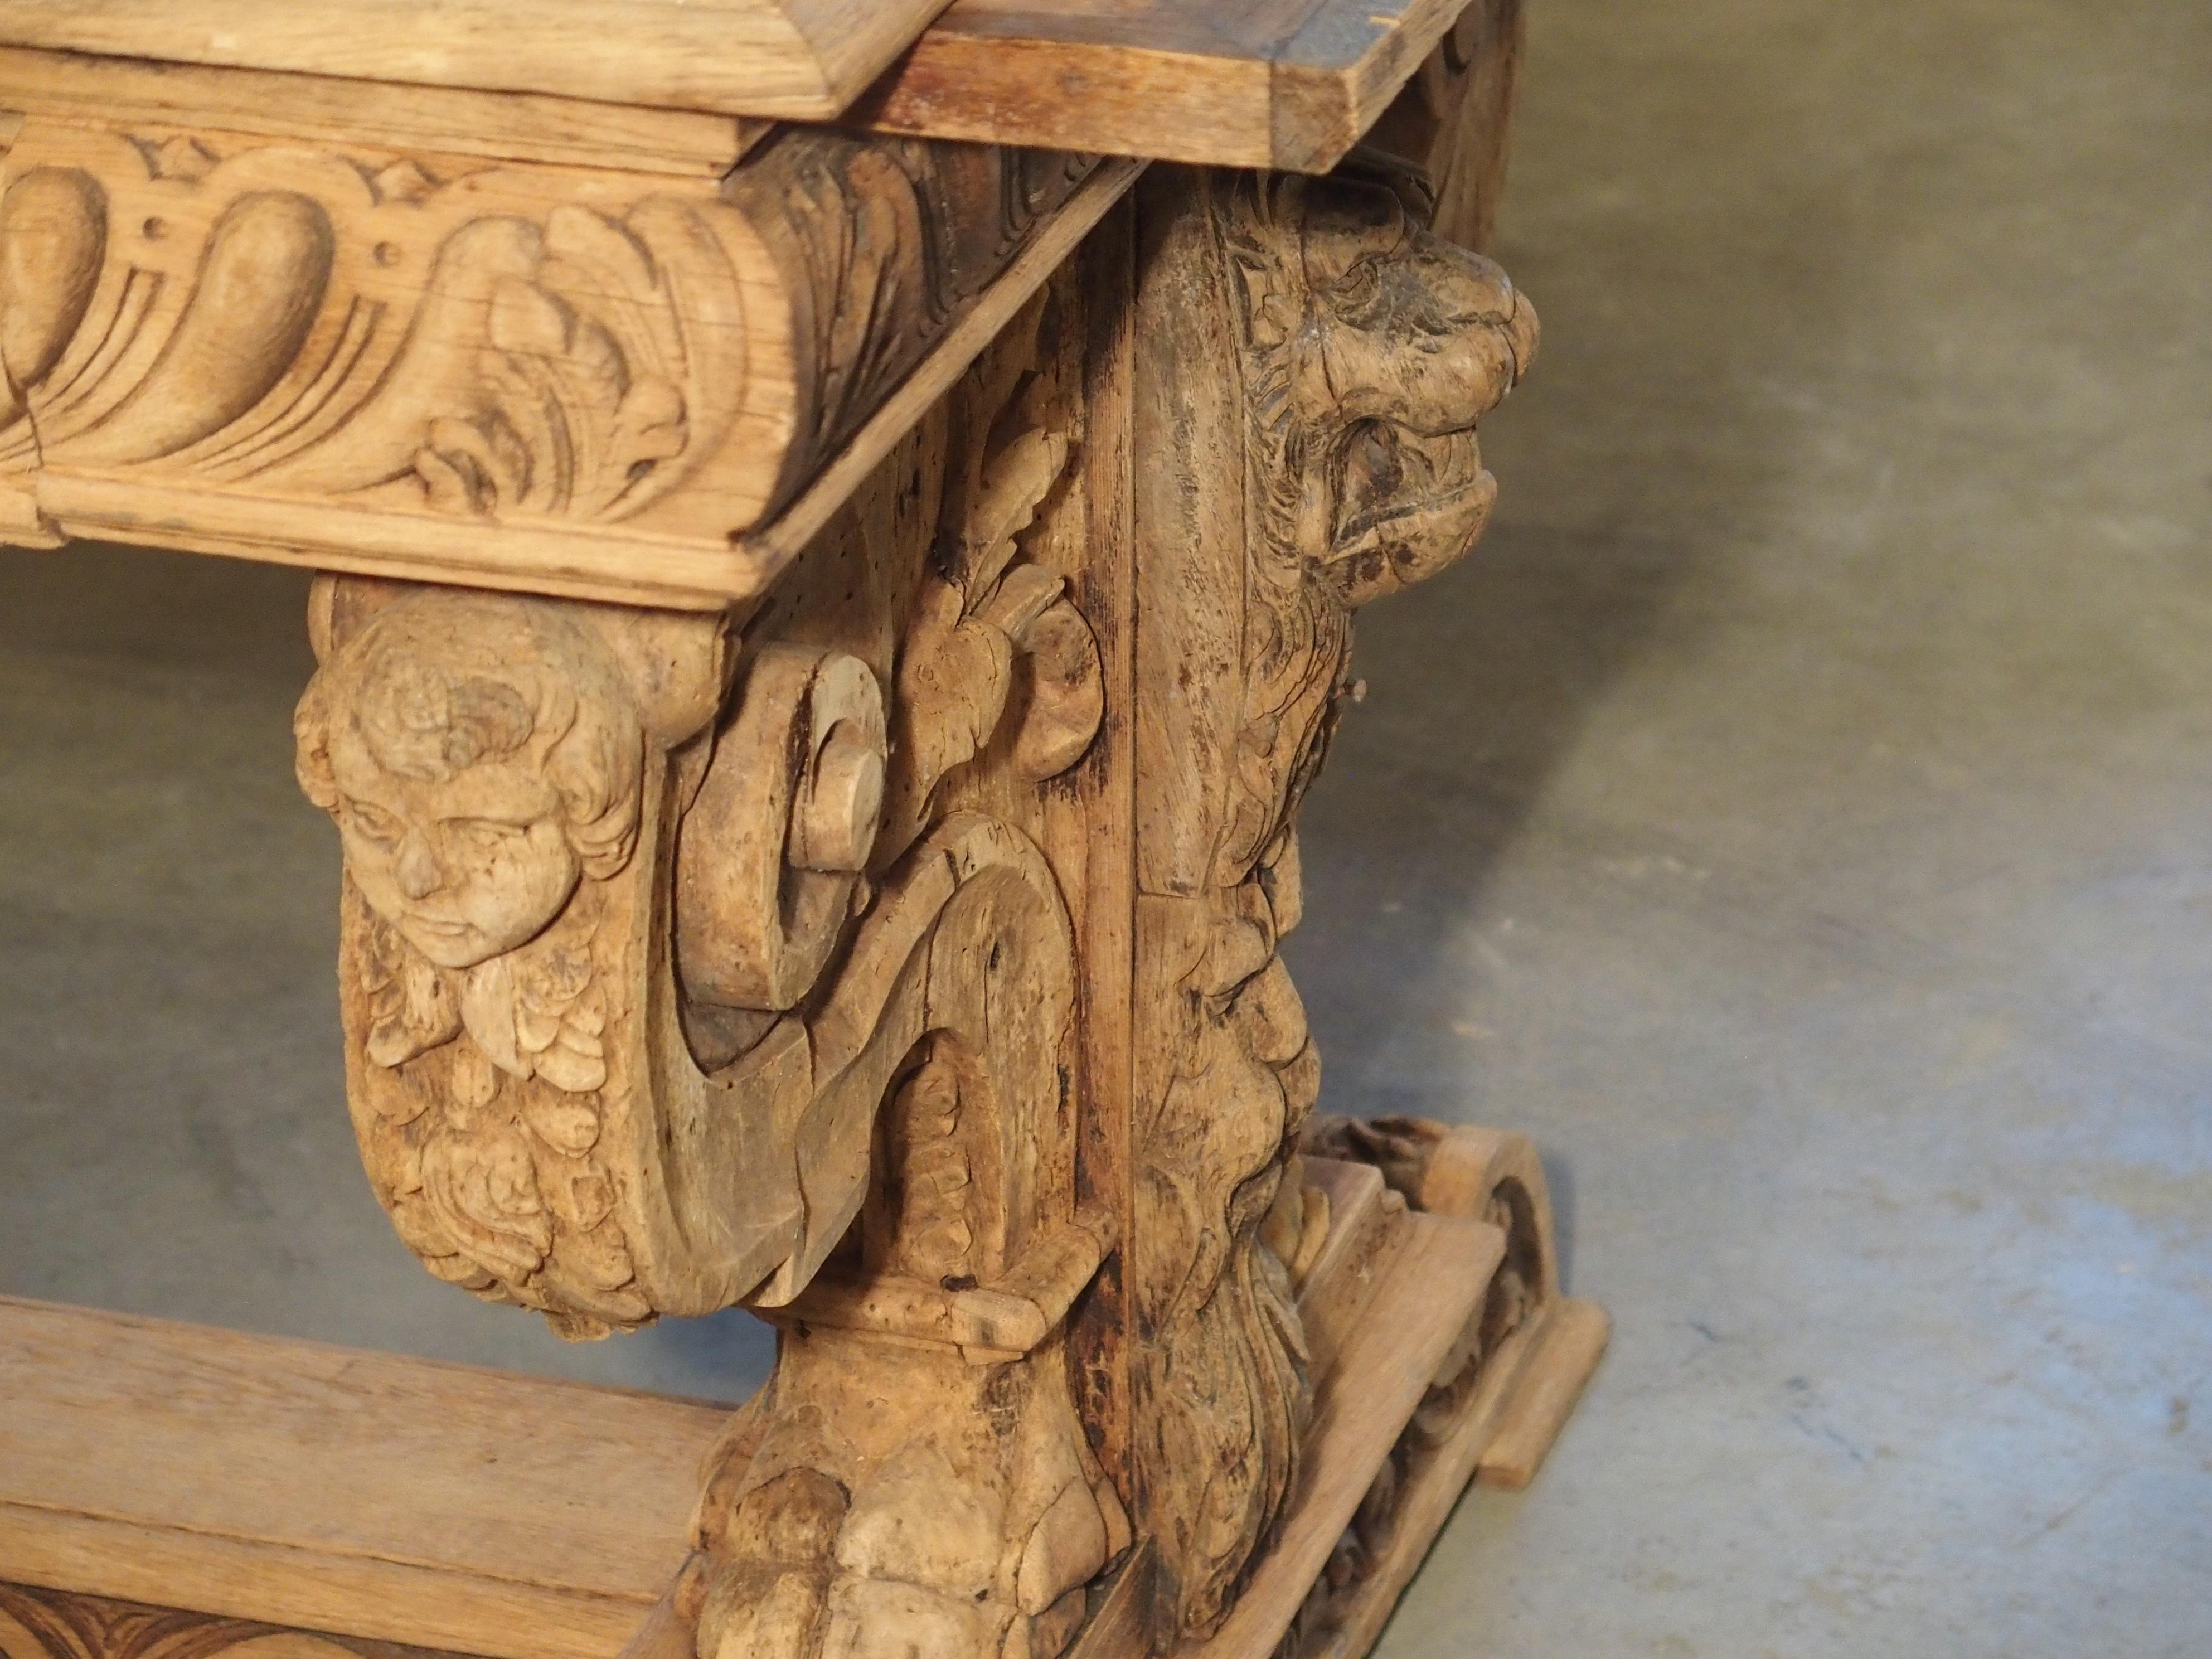 From France, circa 1860, this ornate, stripped oak desk has been carved in the Renaissance style and inset with a contemporary bluestone top. The stone has a blue-grey hue with white veining and visible fossils.

The wood that encases the stone